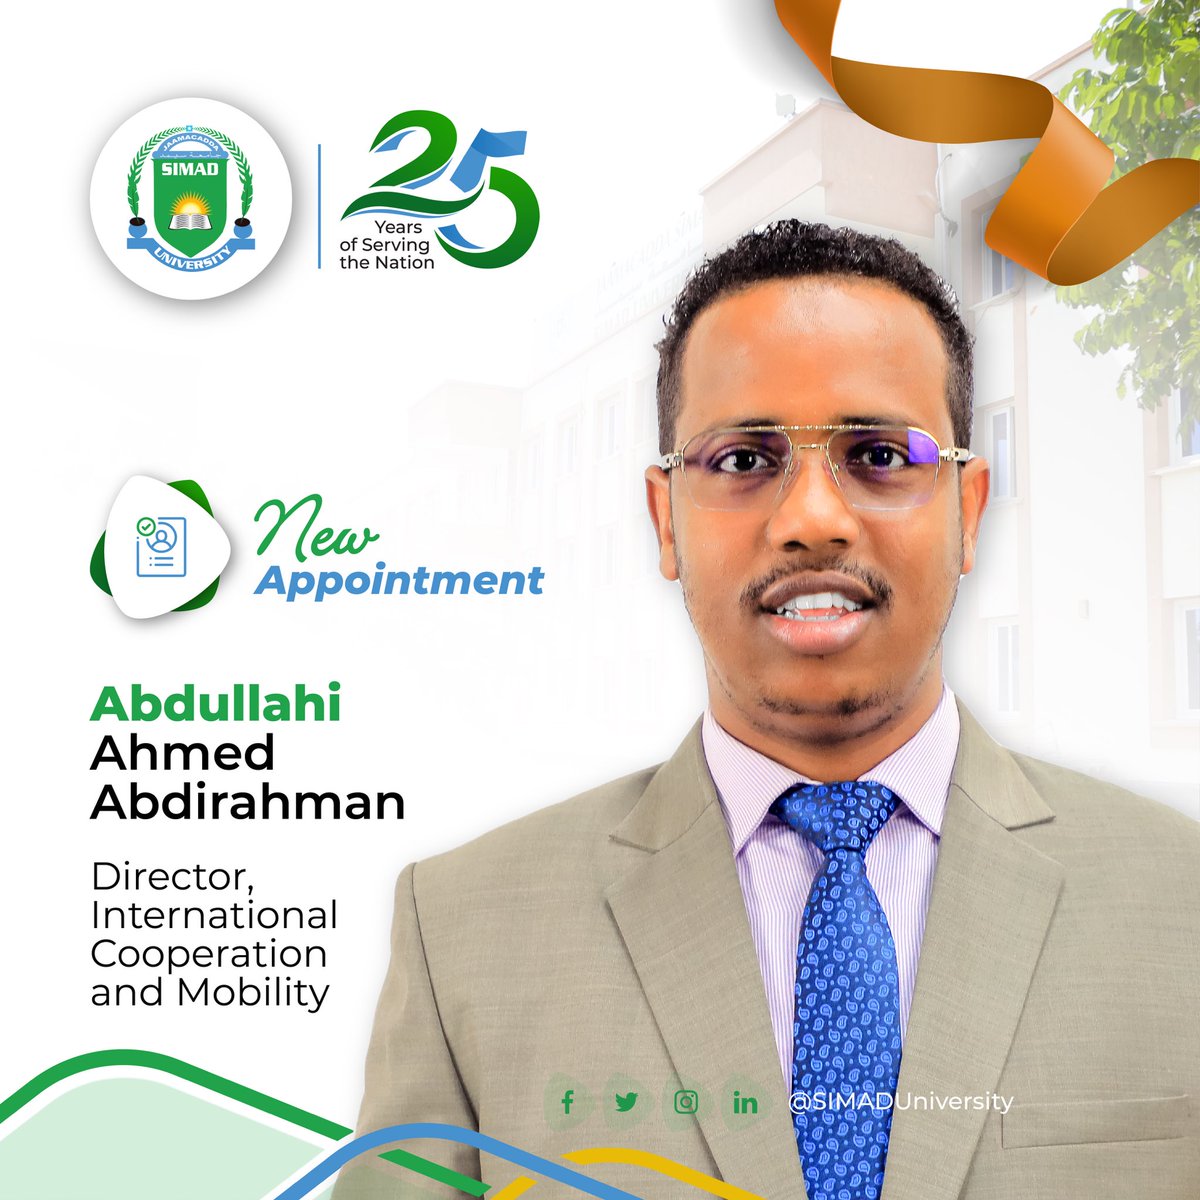 Congratulations to @AbdullahiAhmed_ on his appointment as the Director for International Cooperation! Your dedication and expertise are truly inspiring. We look forward to the positive impact you will continue to make in this new role.